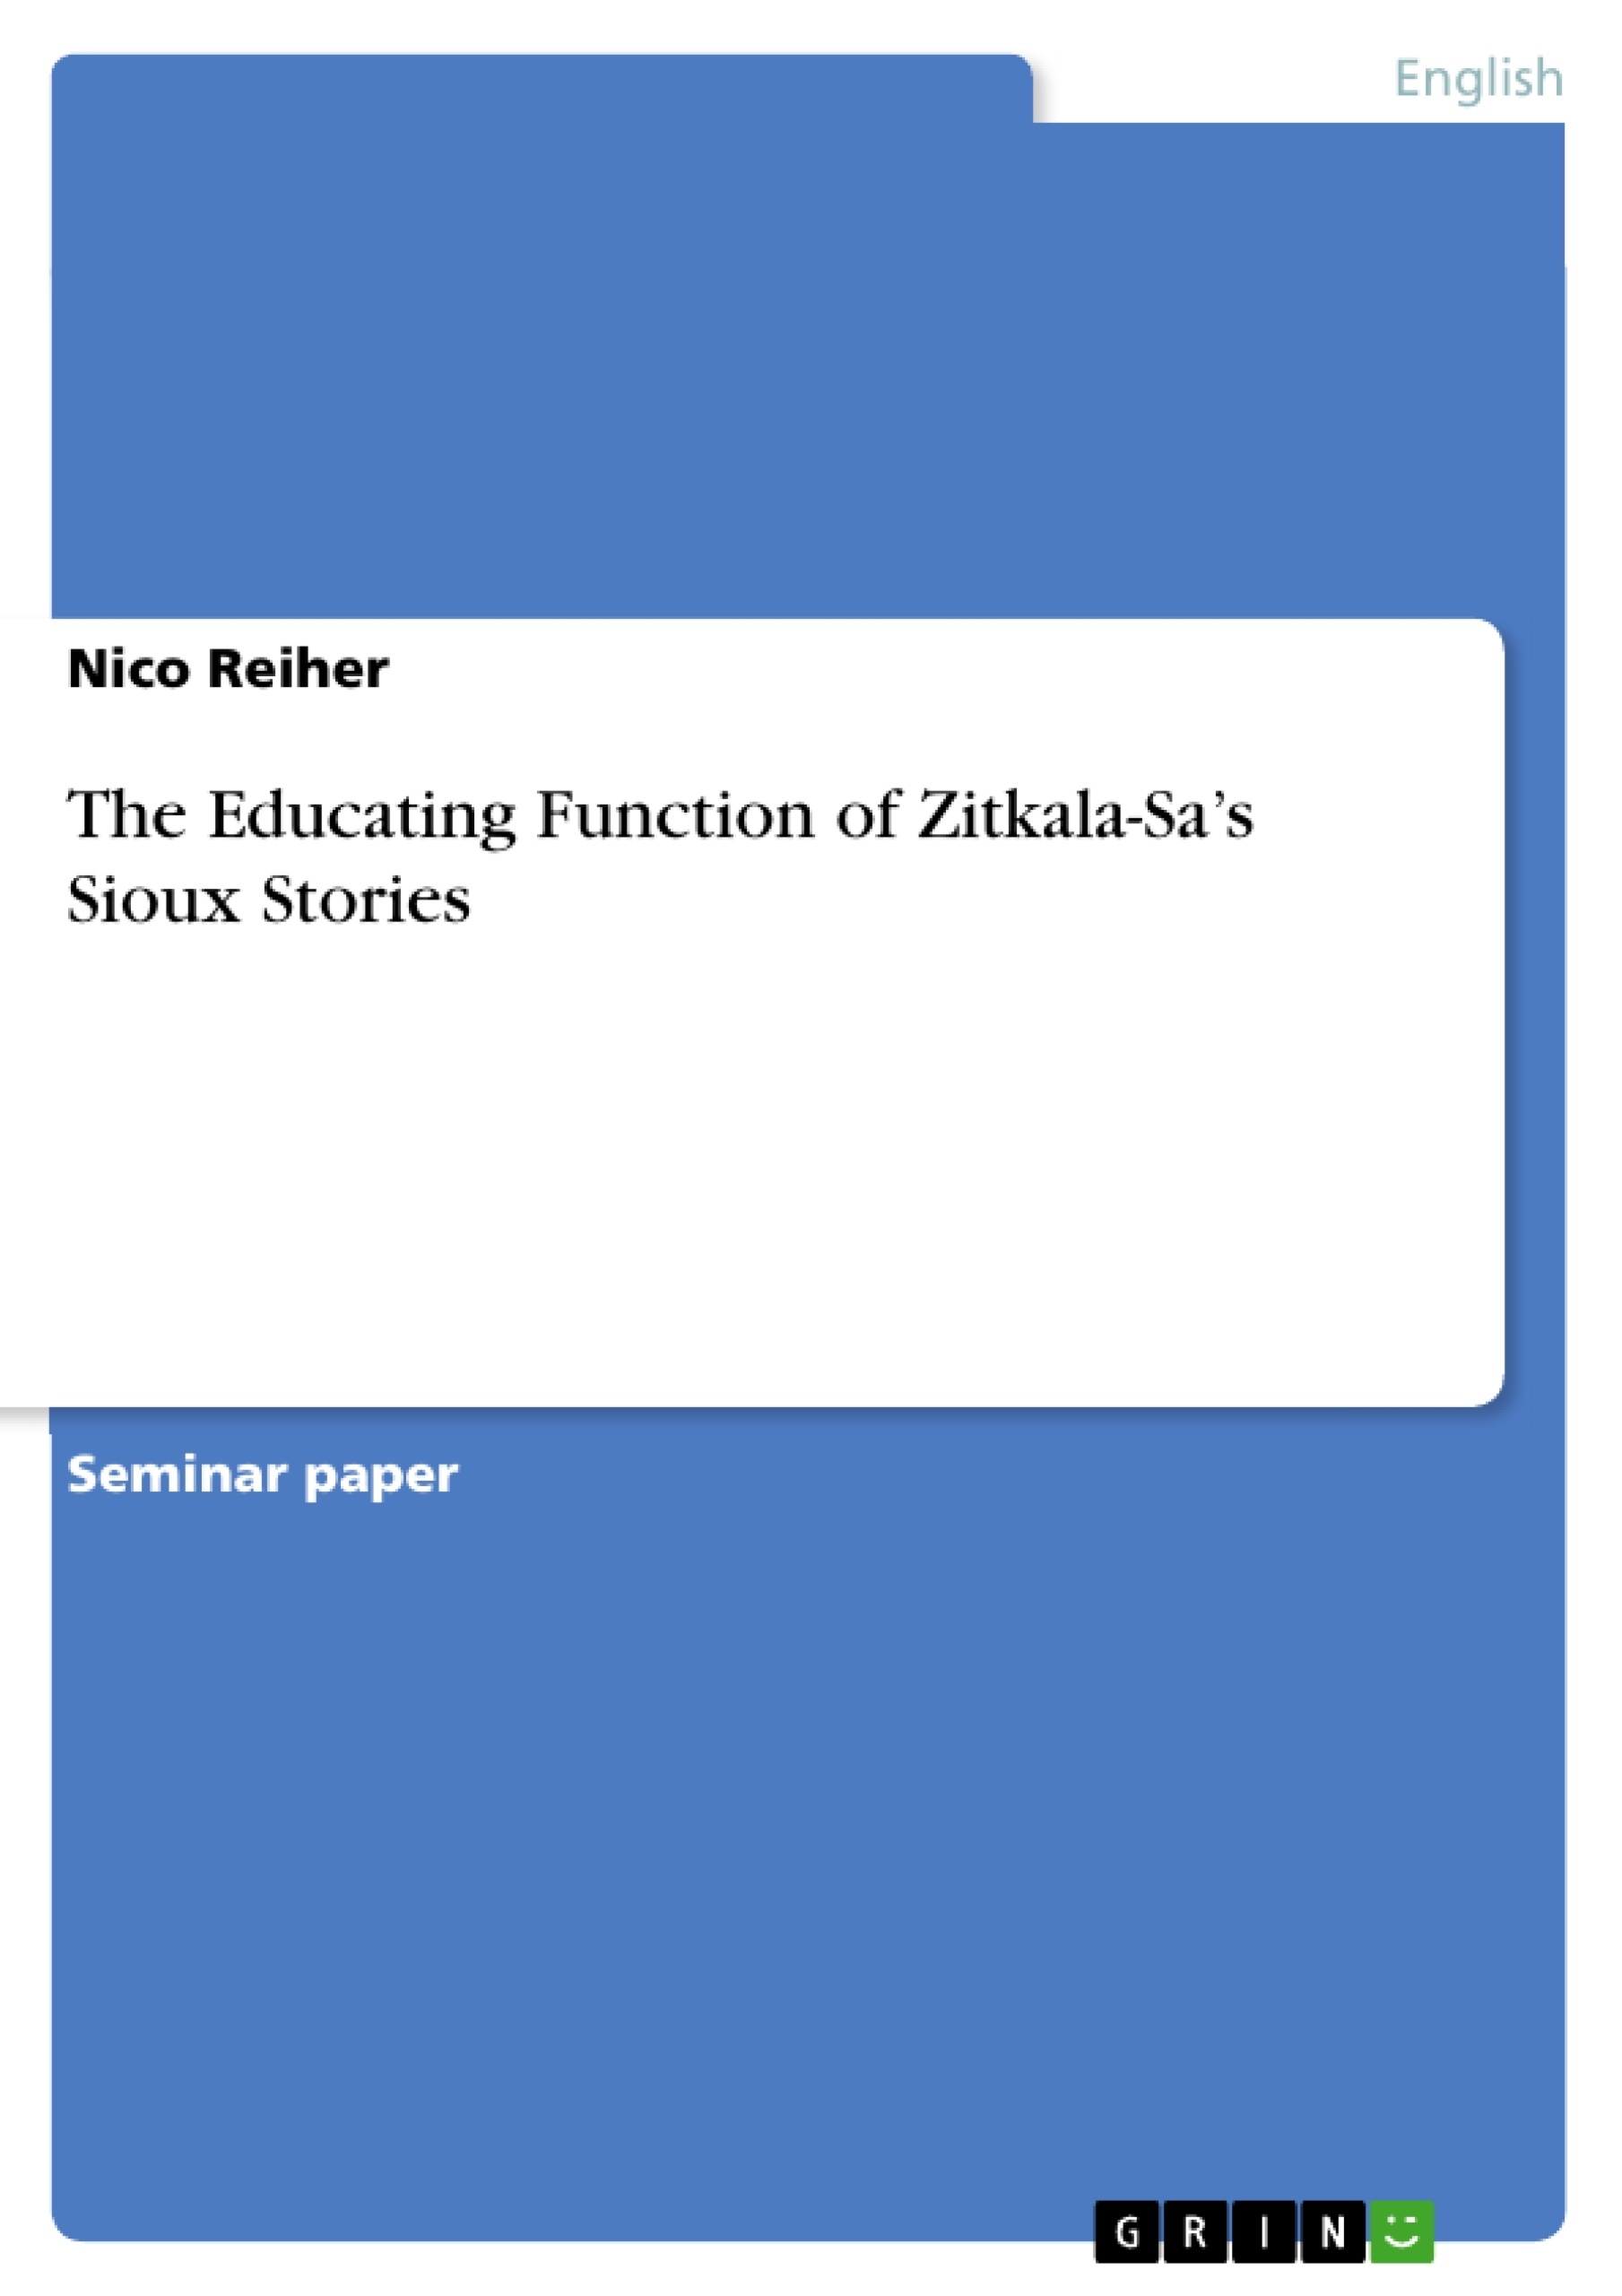 Titre: The Educating Function of Zitkala-Sa’s Sioux Stories